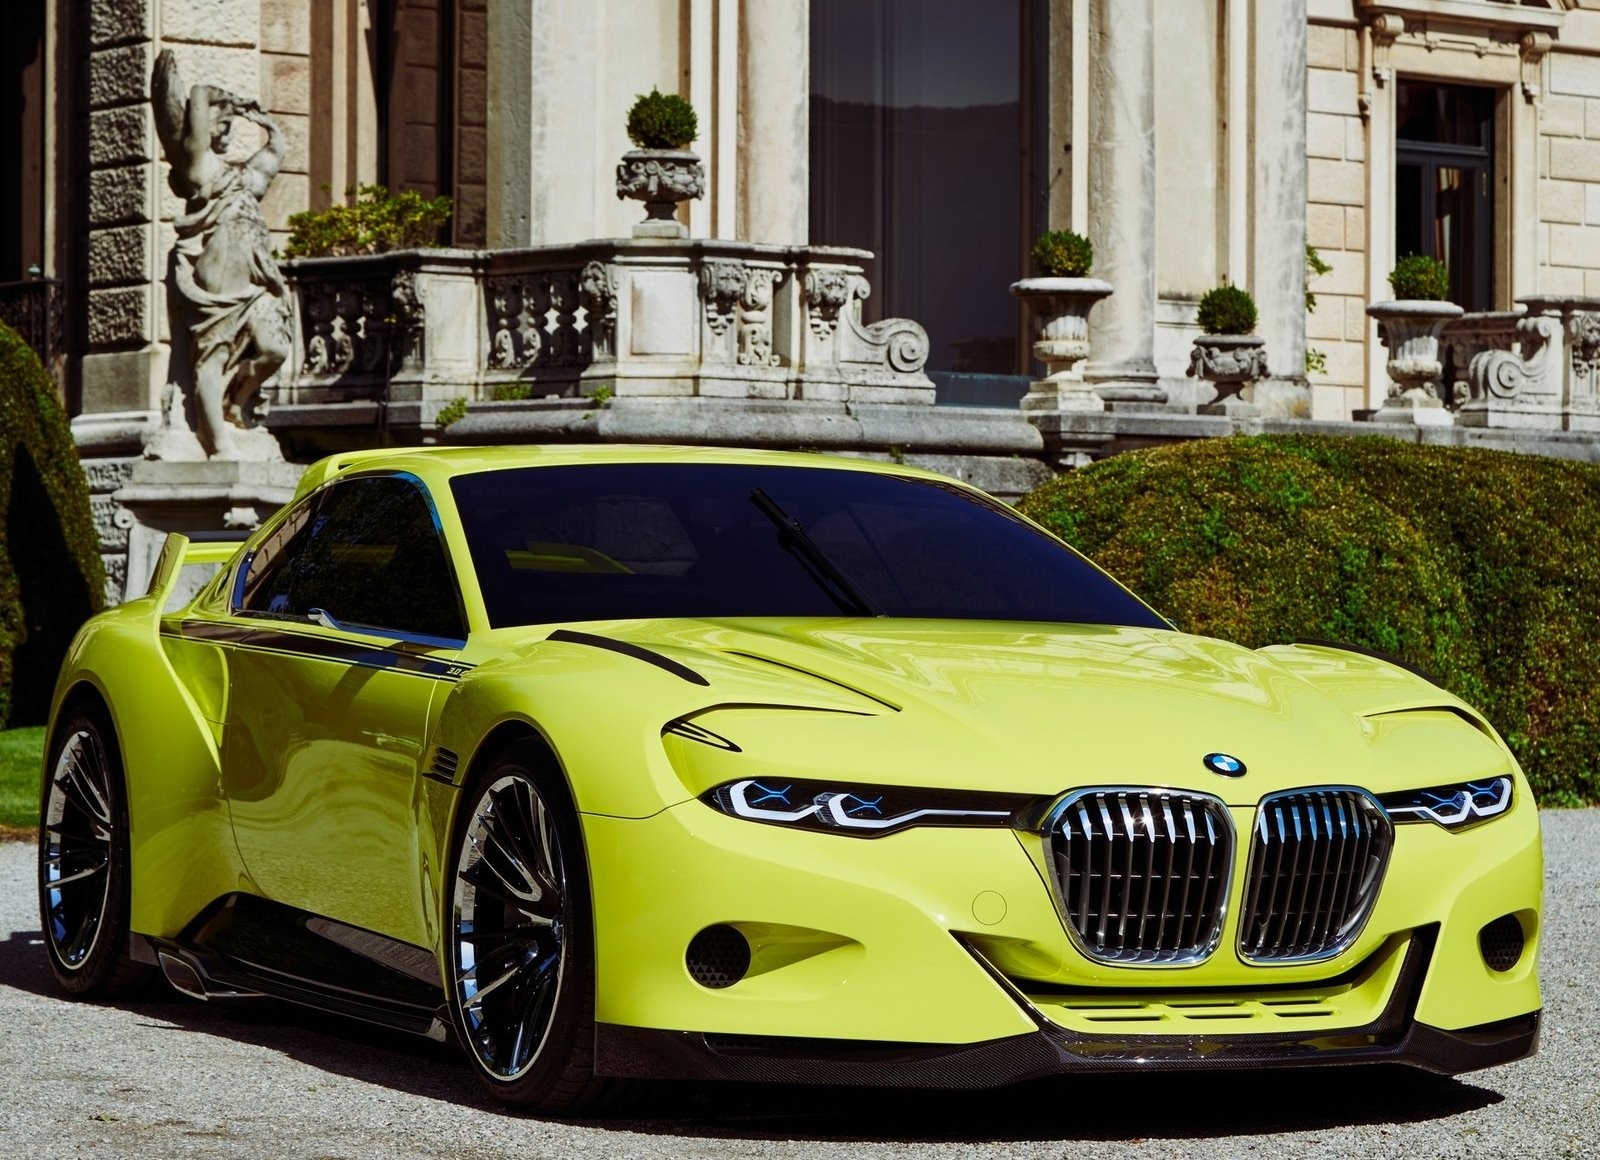 Free Download Hd Wallpapers Of Bmw Car, Bmw Concept - Bmw Hd Car Wallpaper Download - HD Wallpaper 